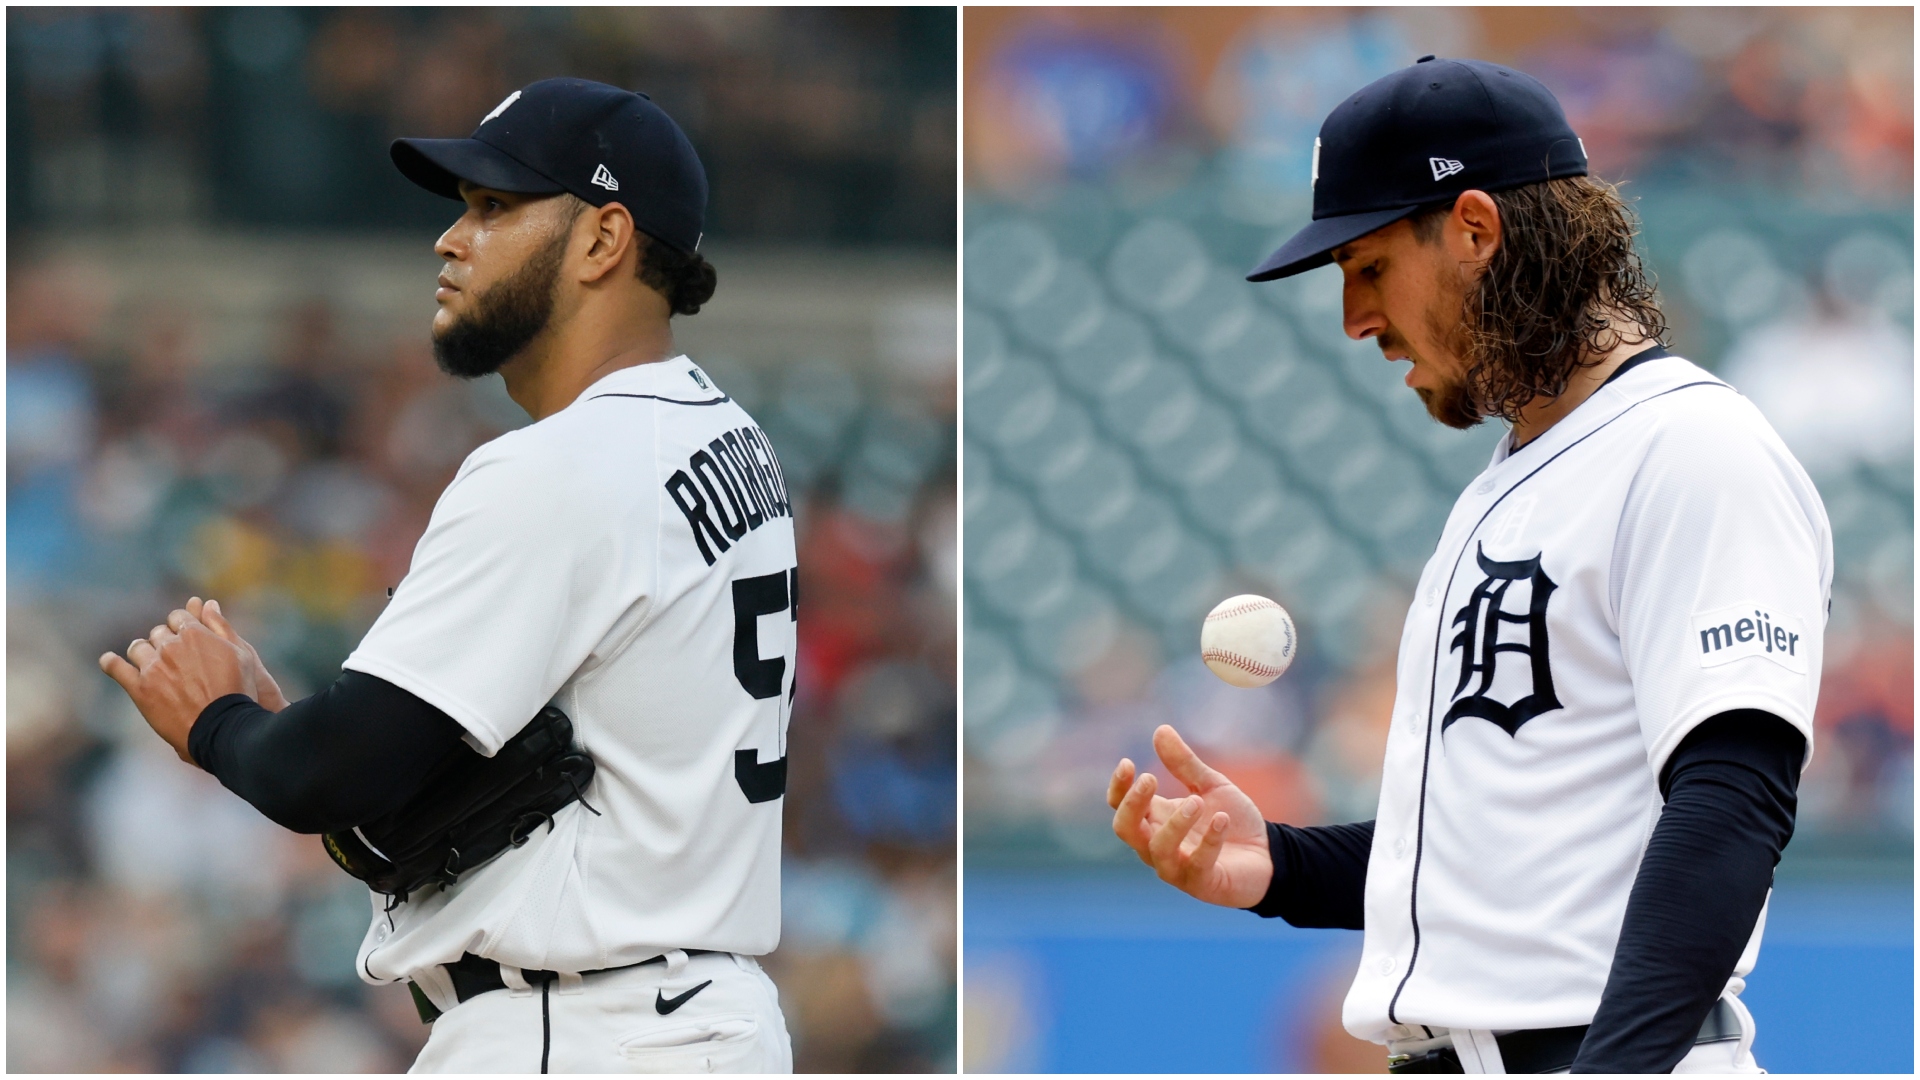 Chill Out, the New Meijer Patch on Detroit Tigers Uniforms Is Fine